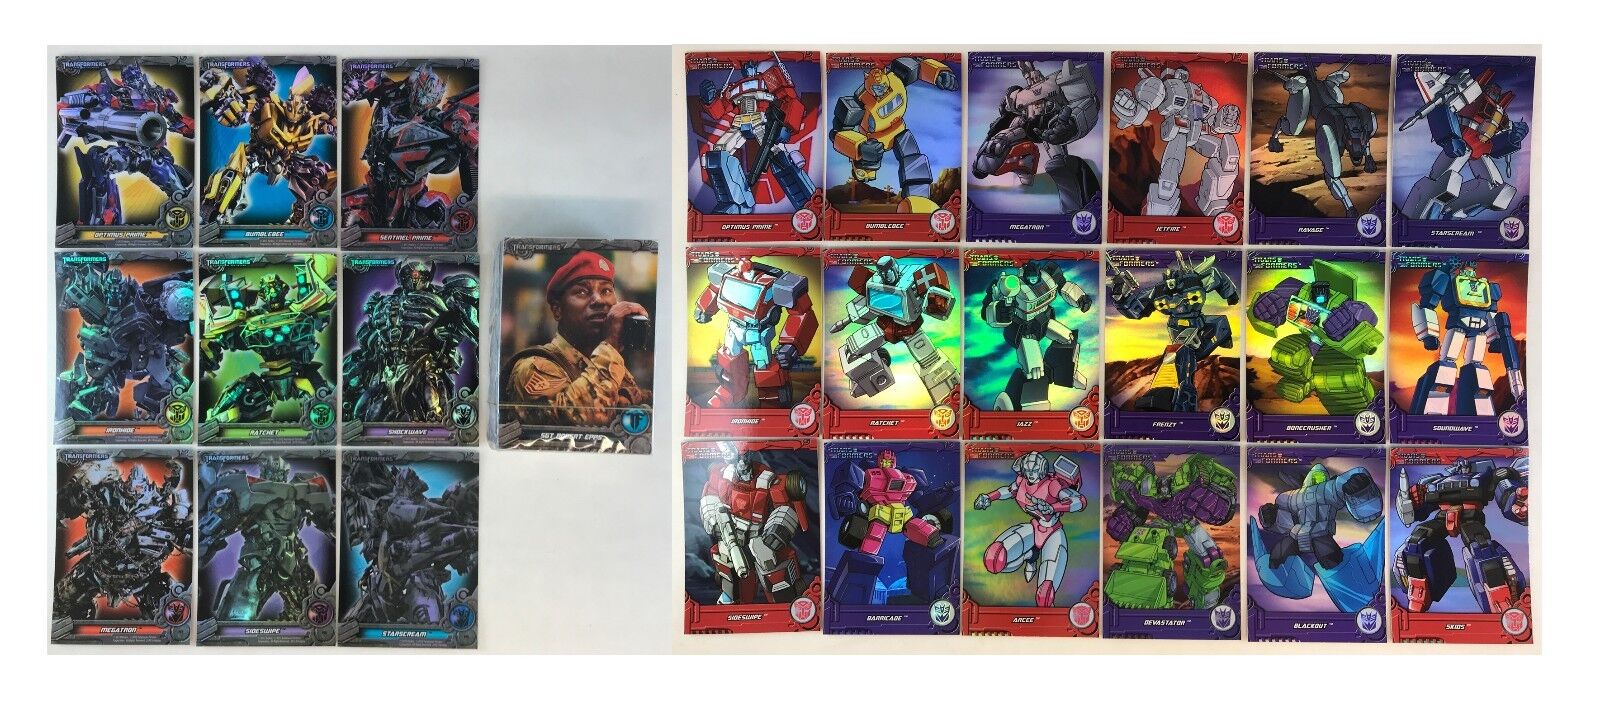 TRANSFORMERS OPTIMUM COLLECTION 2013 BREYGENT Complete Card Set w/ 27 FOIL CHASE